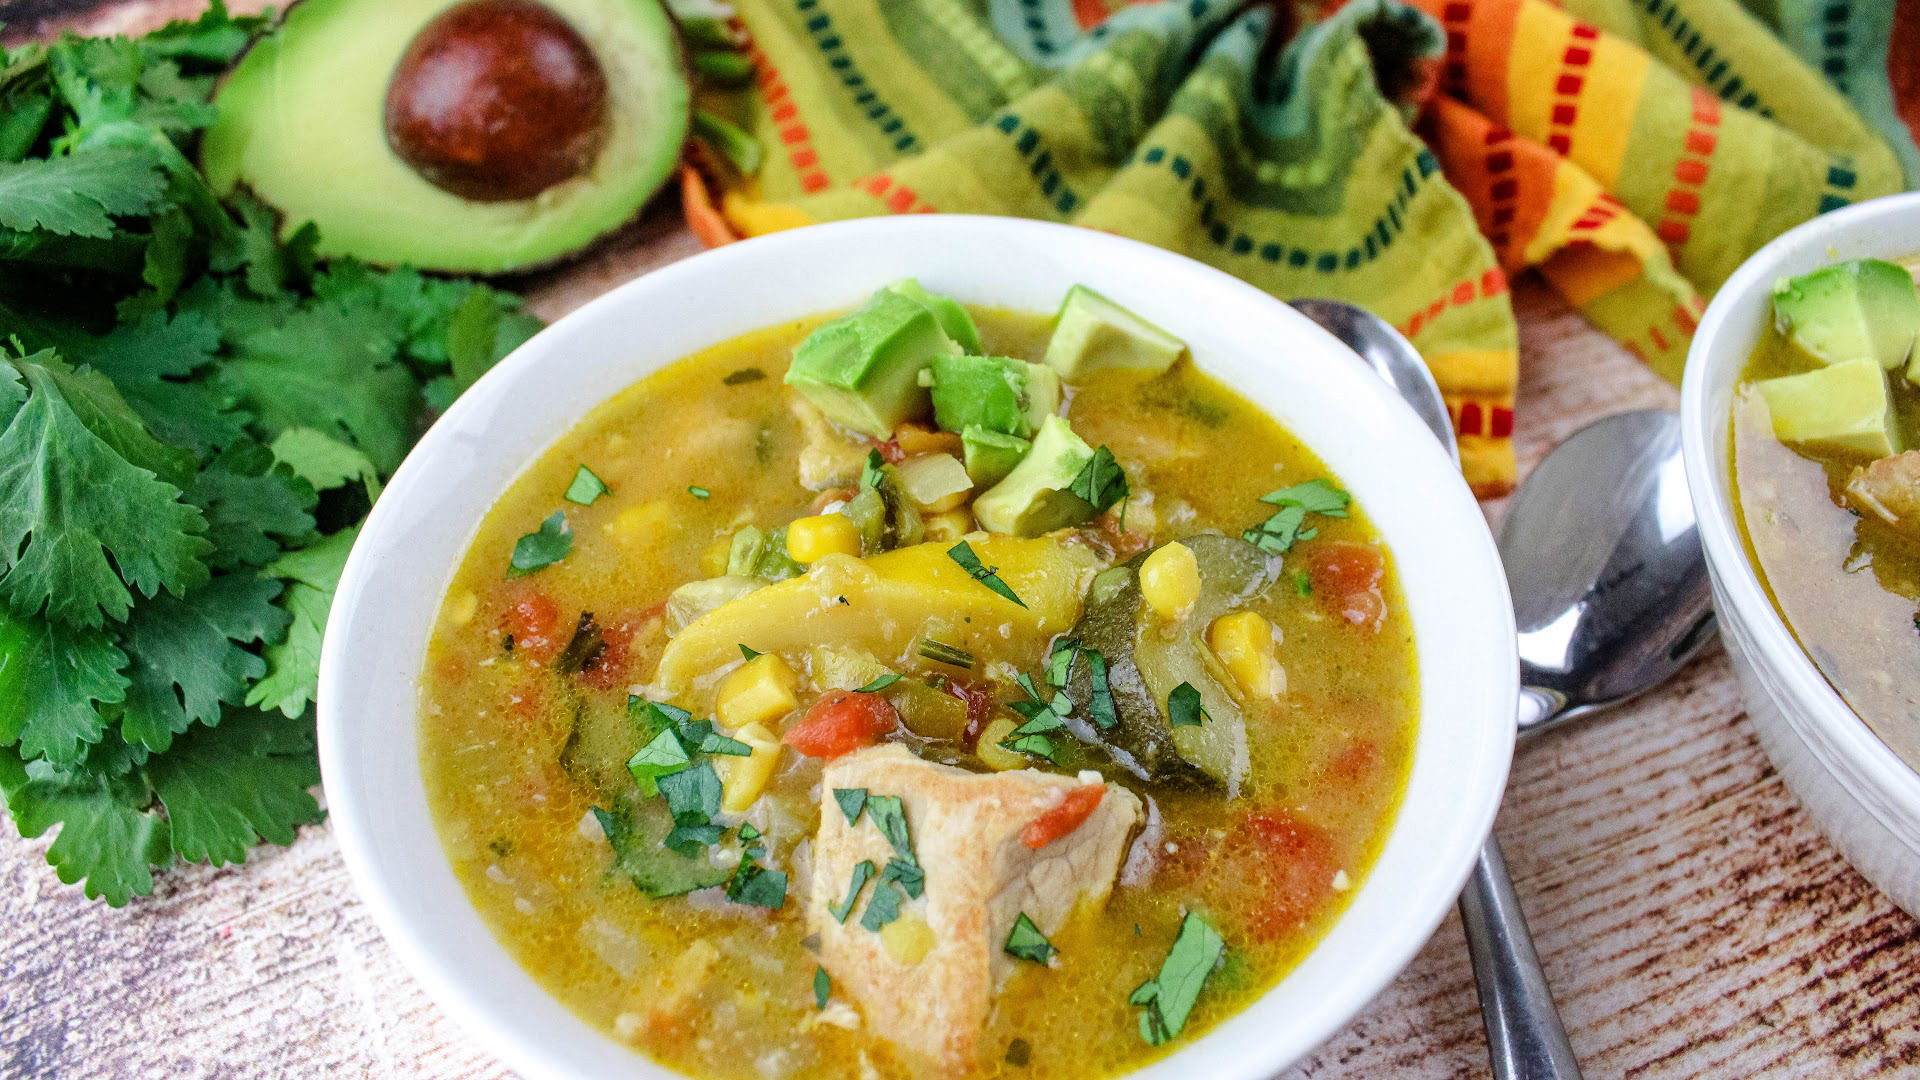 Full Of Southwest Flavor And Spices, This Comforting Green Chile Pork ...